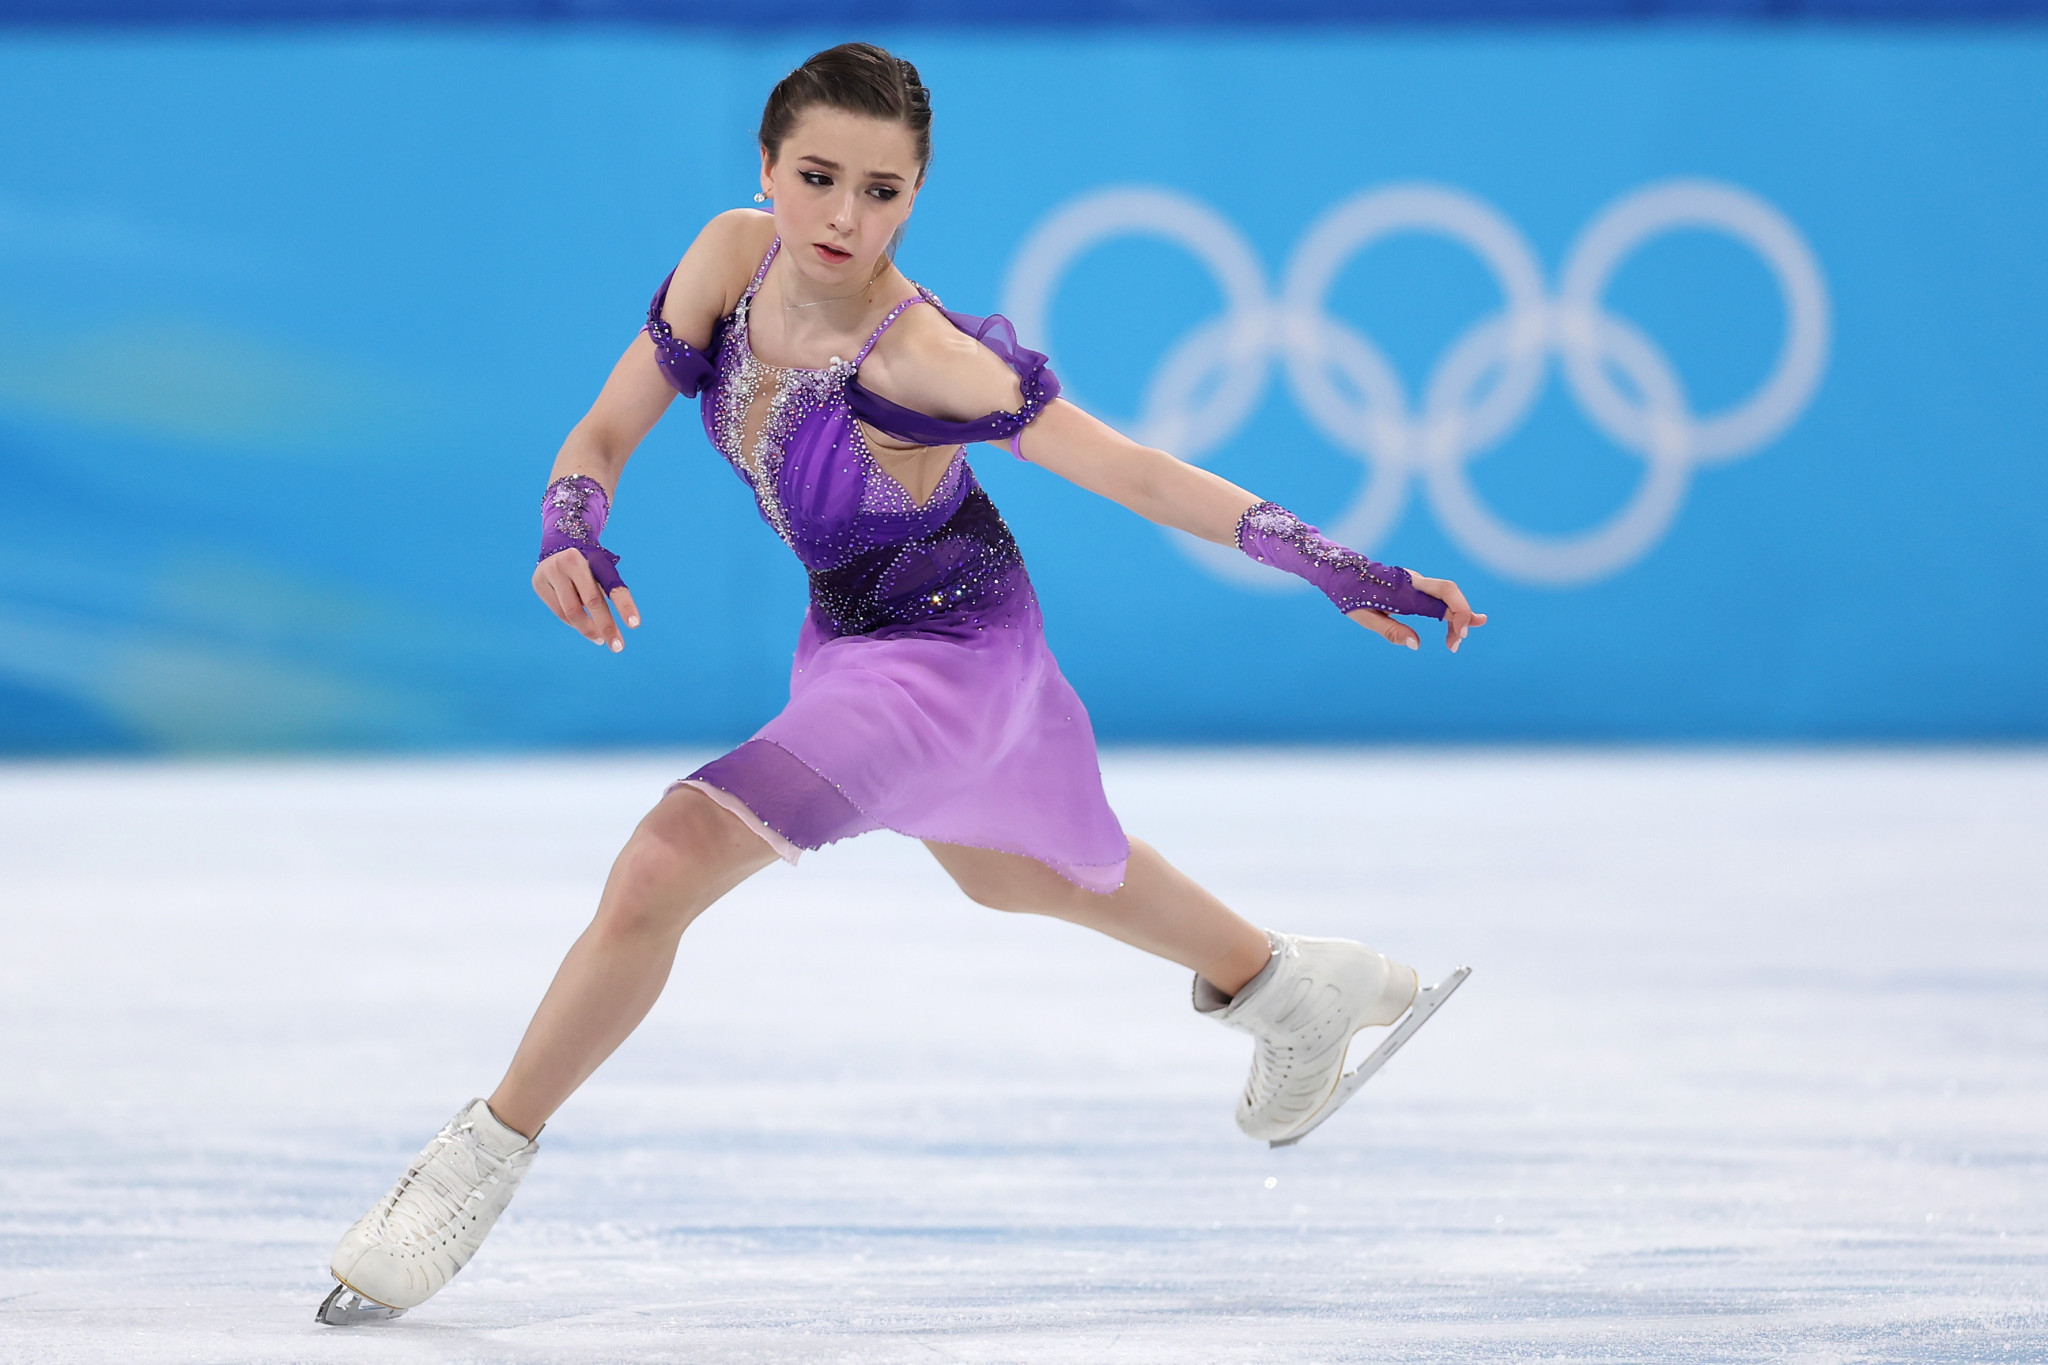 Kamila Valieva's anti-doping violation case is delaying the Medal Ceremony in the figure skating team event ©Getty Images